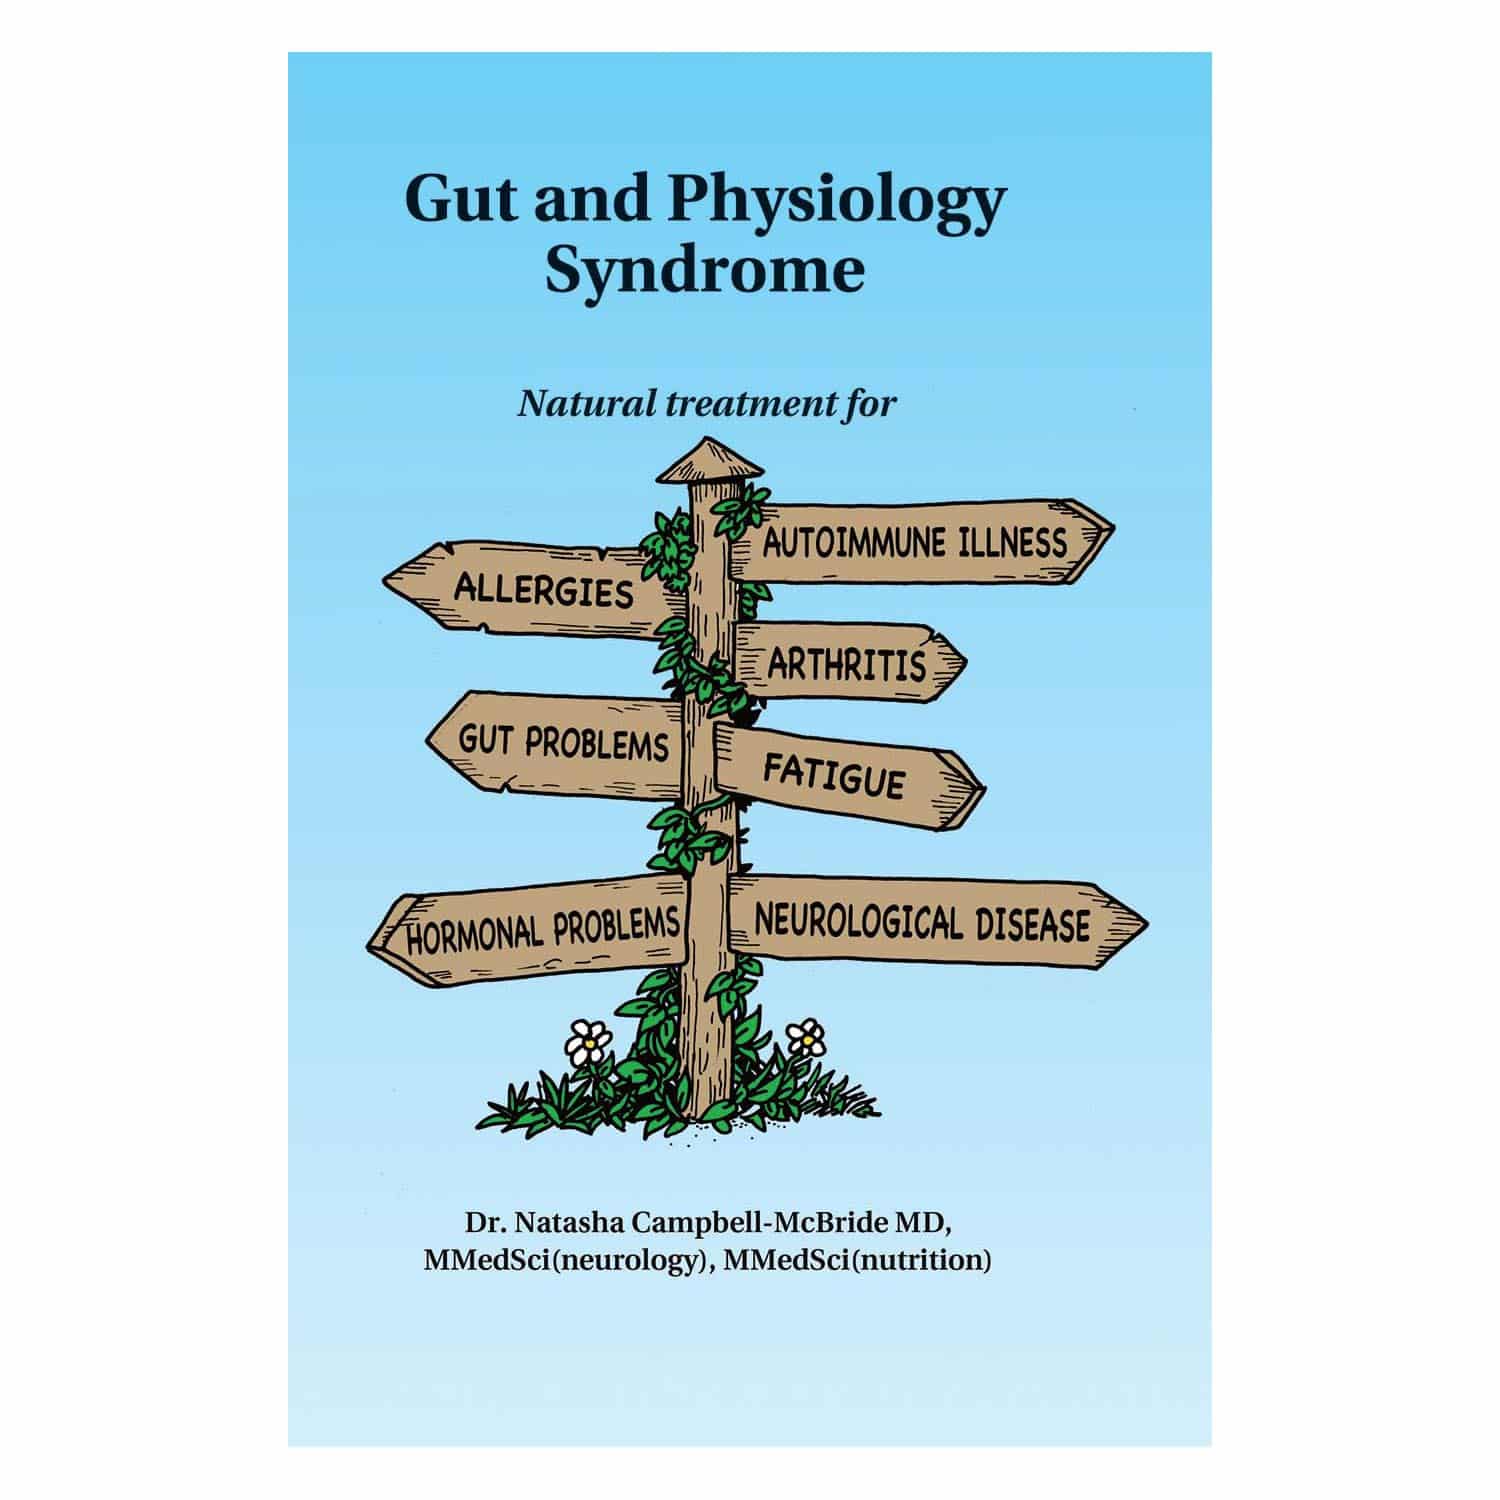 Gut and Physiology Syndrome: Natural Treatment for Allergies, Autoimmune Illness, Arthritis, Gut Problems, Fatigue, Hormonal Problems, Neurological Disease and More